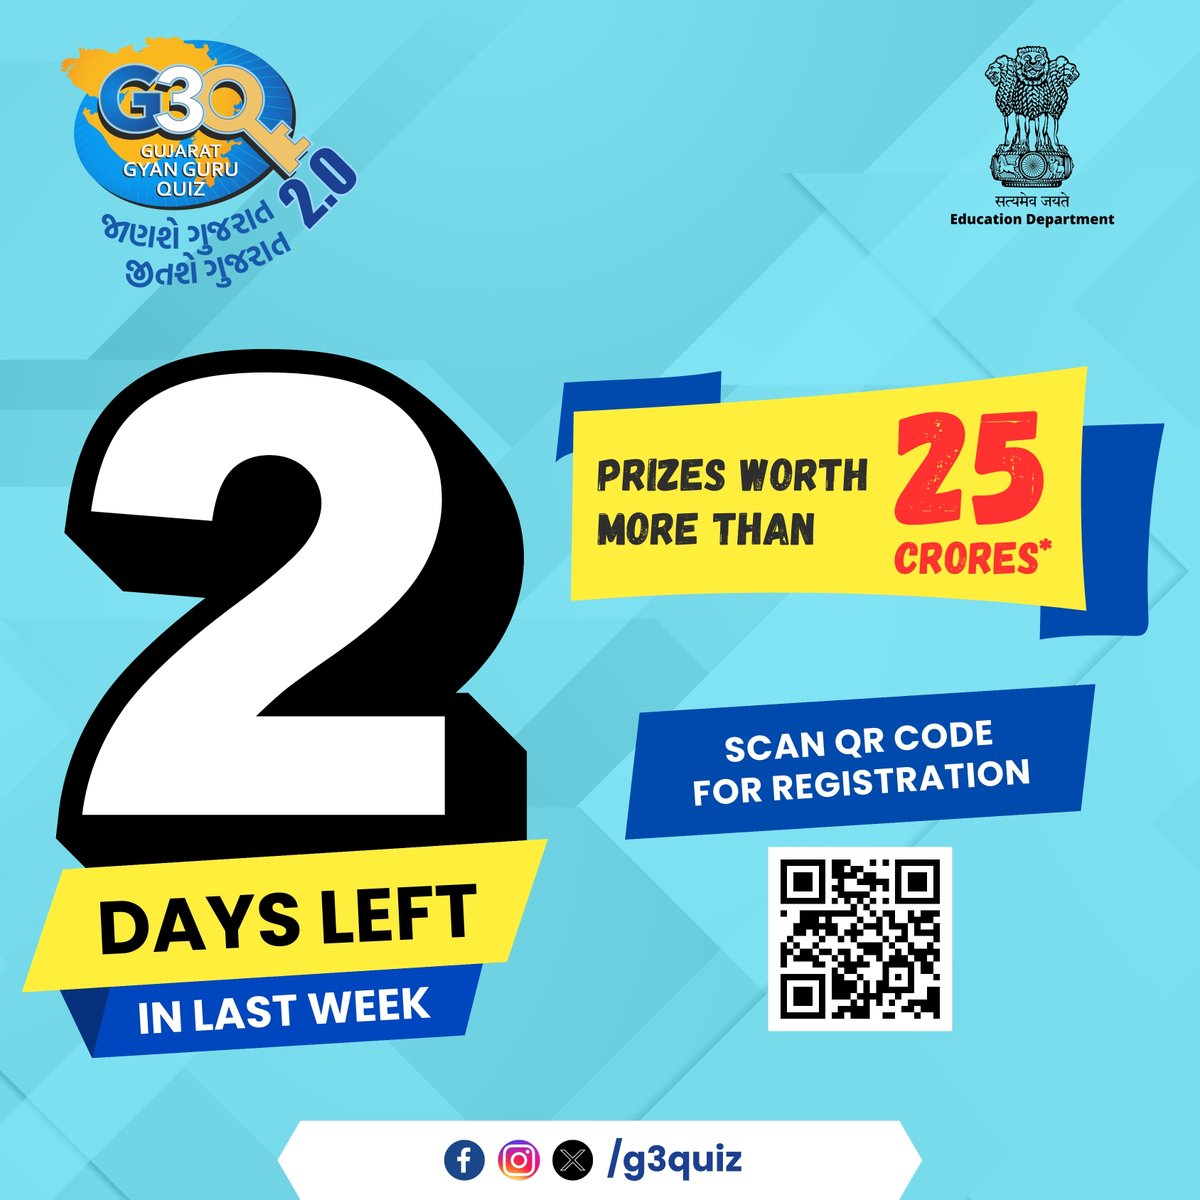 Only 2 days left in Last Week have you registered yet? Register Now and win prizes worth more than Rs 25* Crore Registration Link: g3q.co.in/#reg #GujaratGyanGuruQuiz #G3Q2024 #Gujarat #Education #Knowledge #Quiz #Win